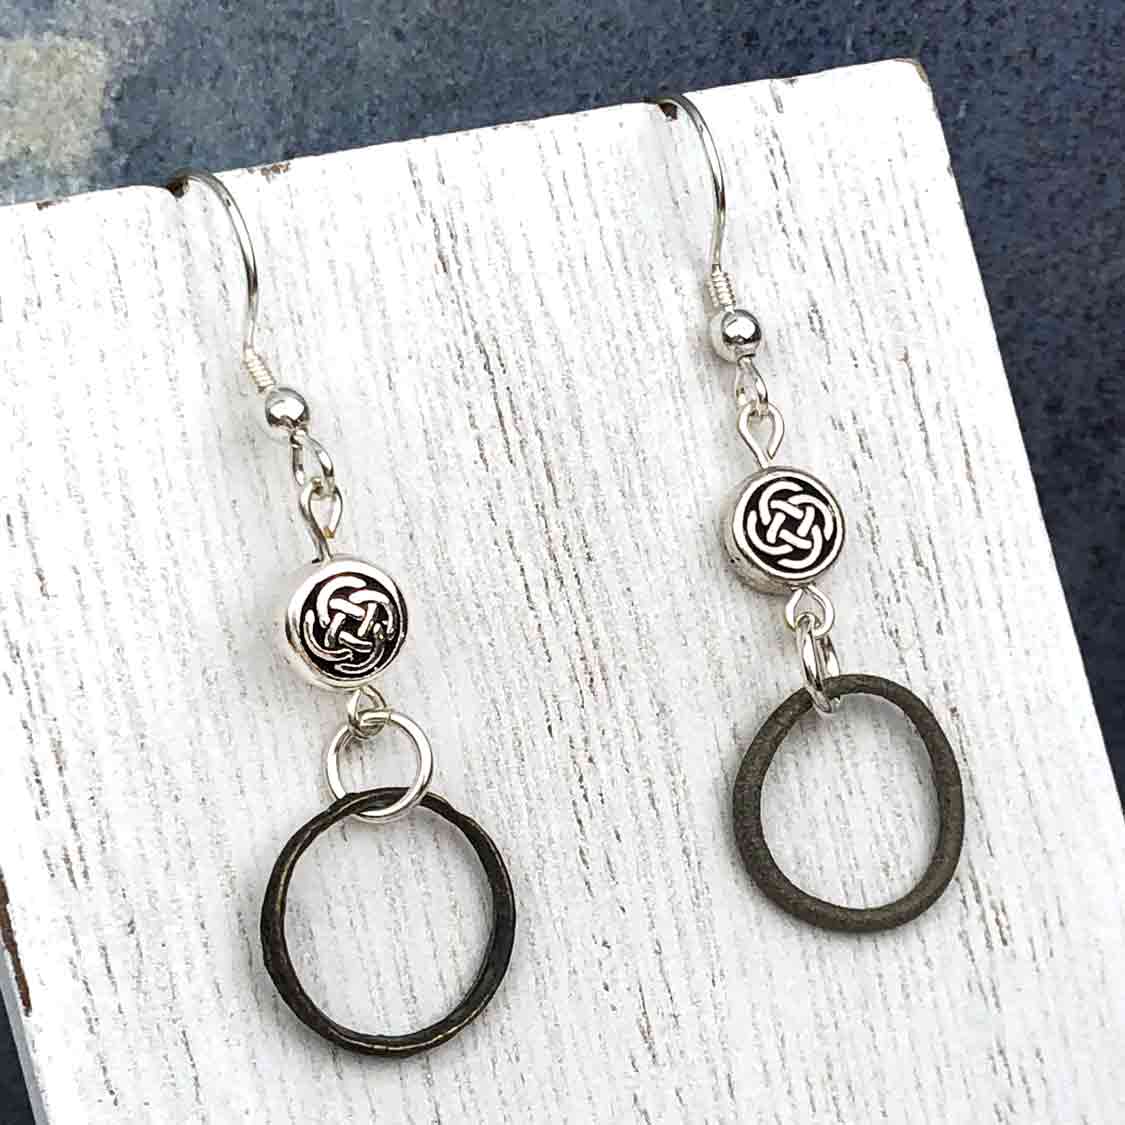 Tiny Deep Bronze Celtic Ring Money Earrings with Celtic Knot Charm